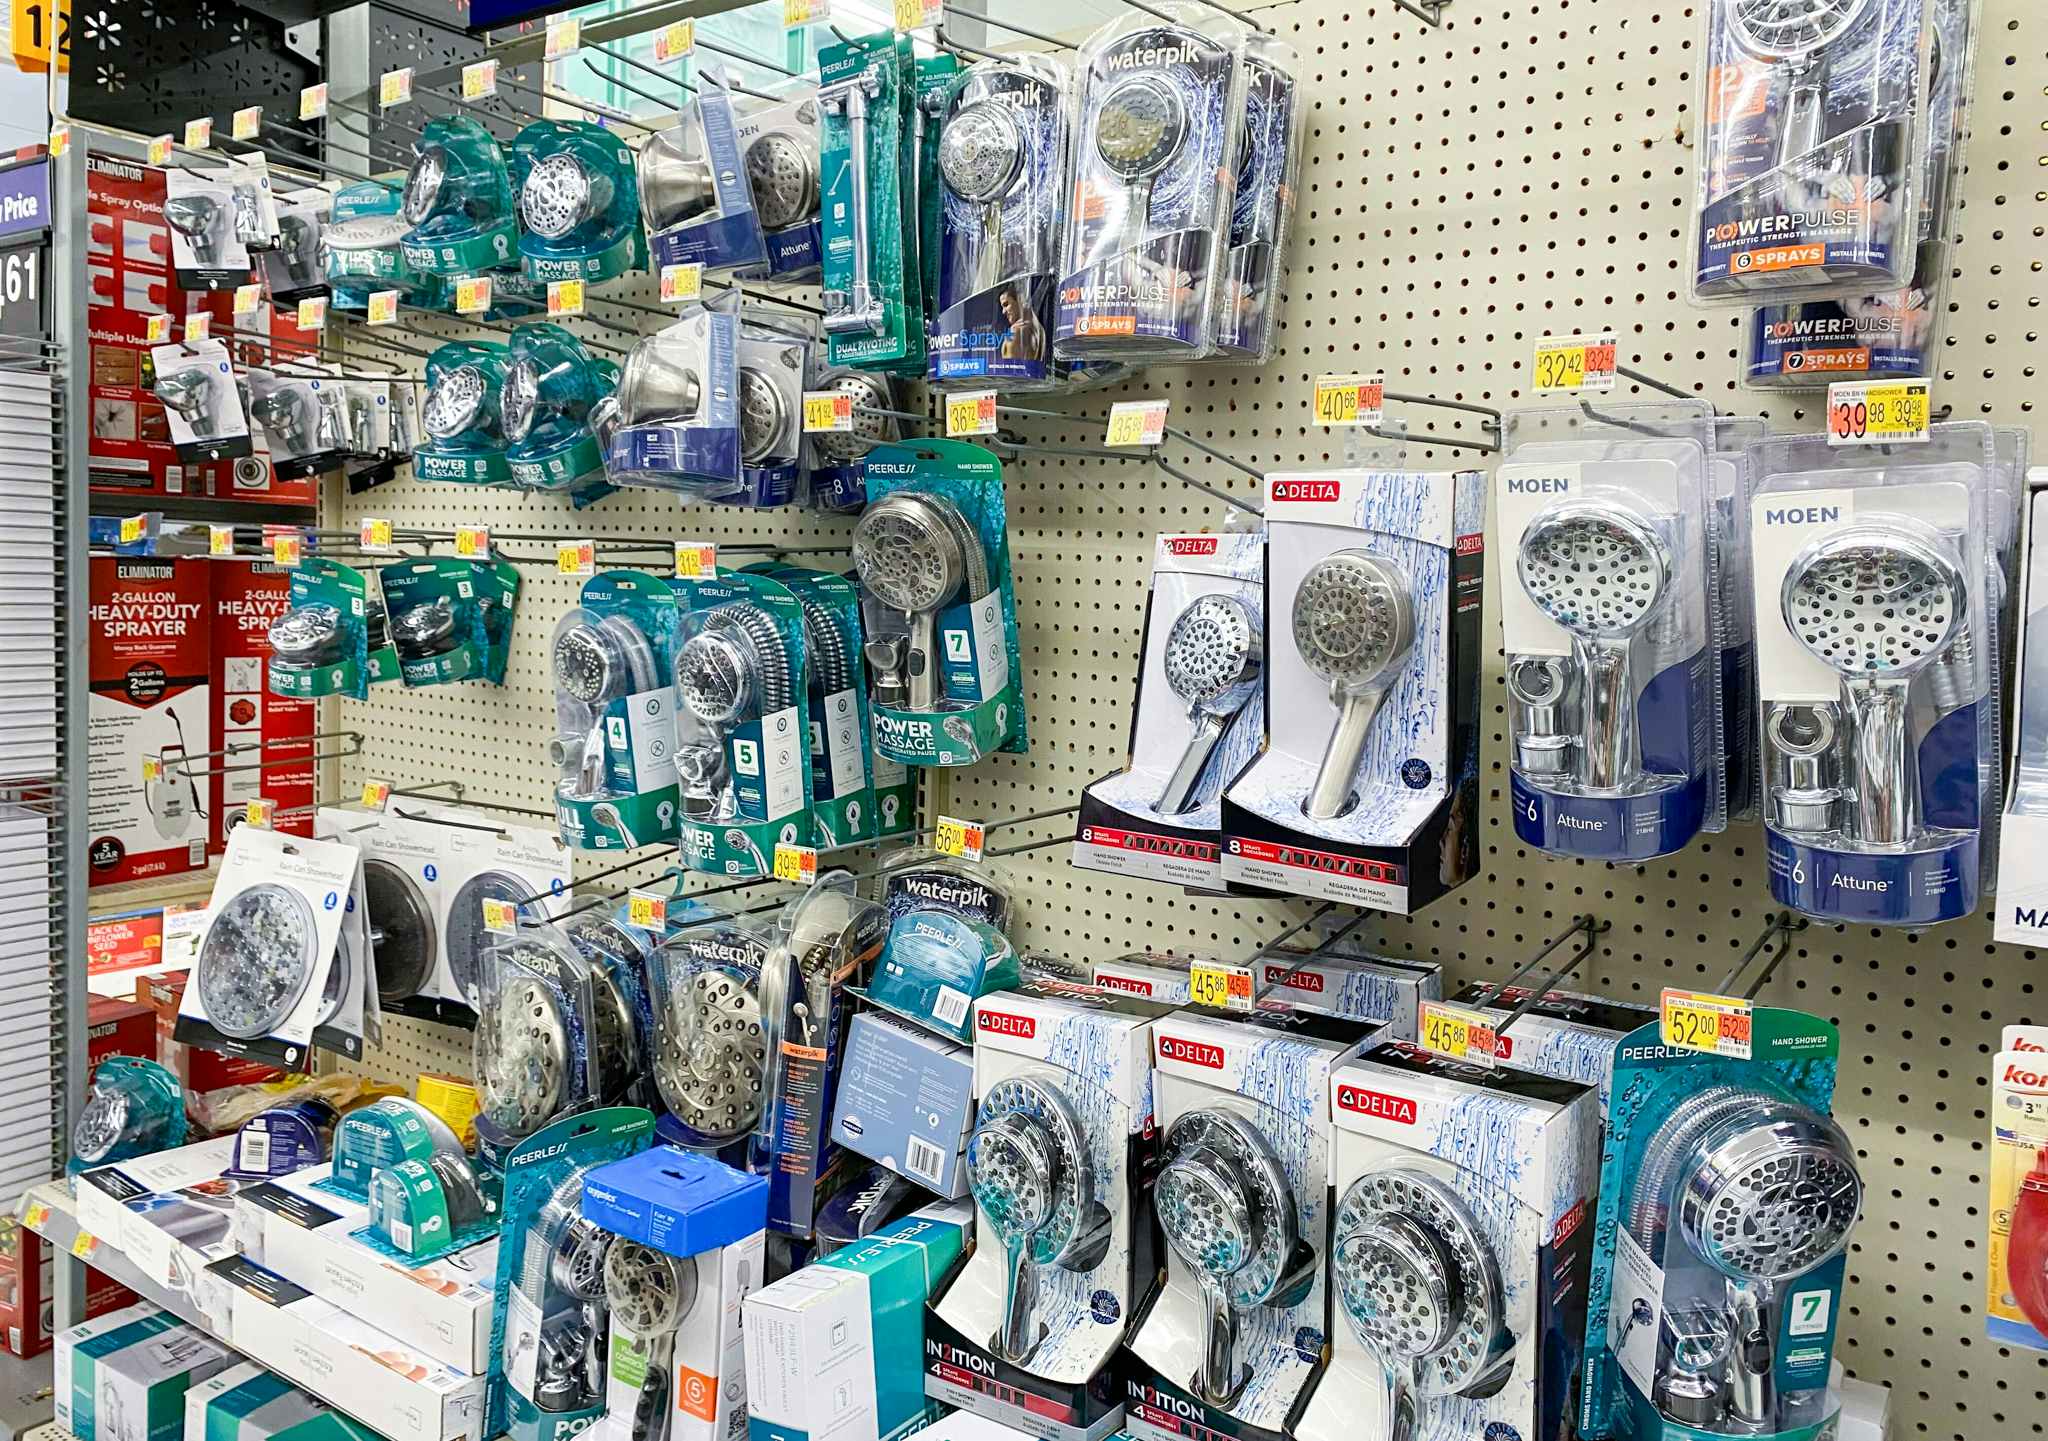 Showerheads on Clearance: Prices as Low as $4 at Walmart